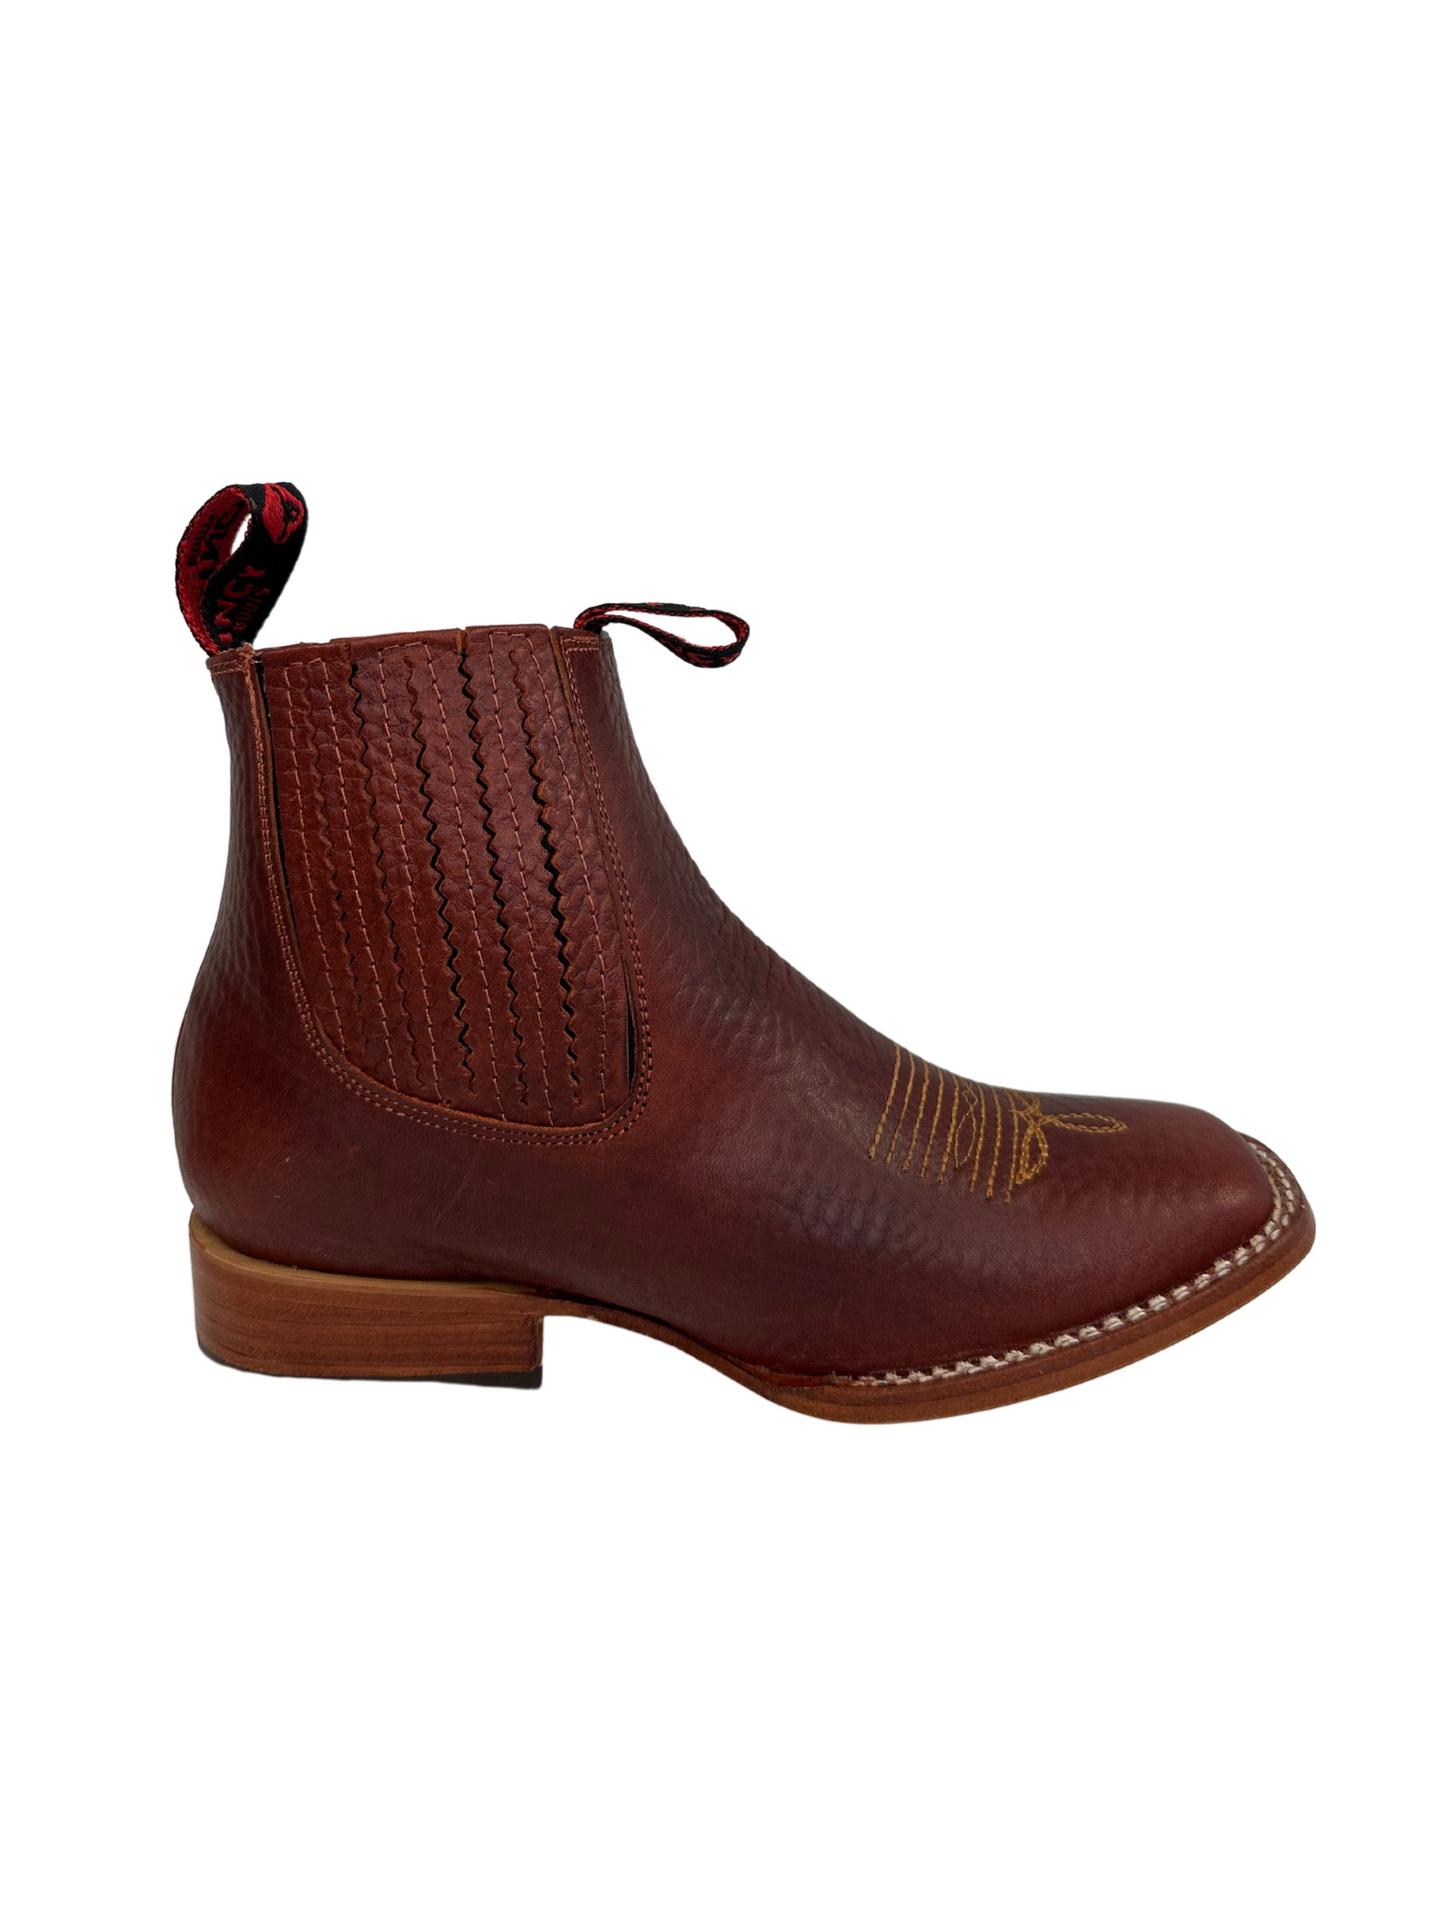 Quincy Kid's Brick Leather Short Boot